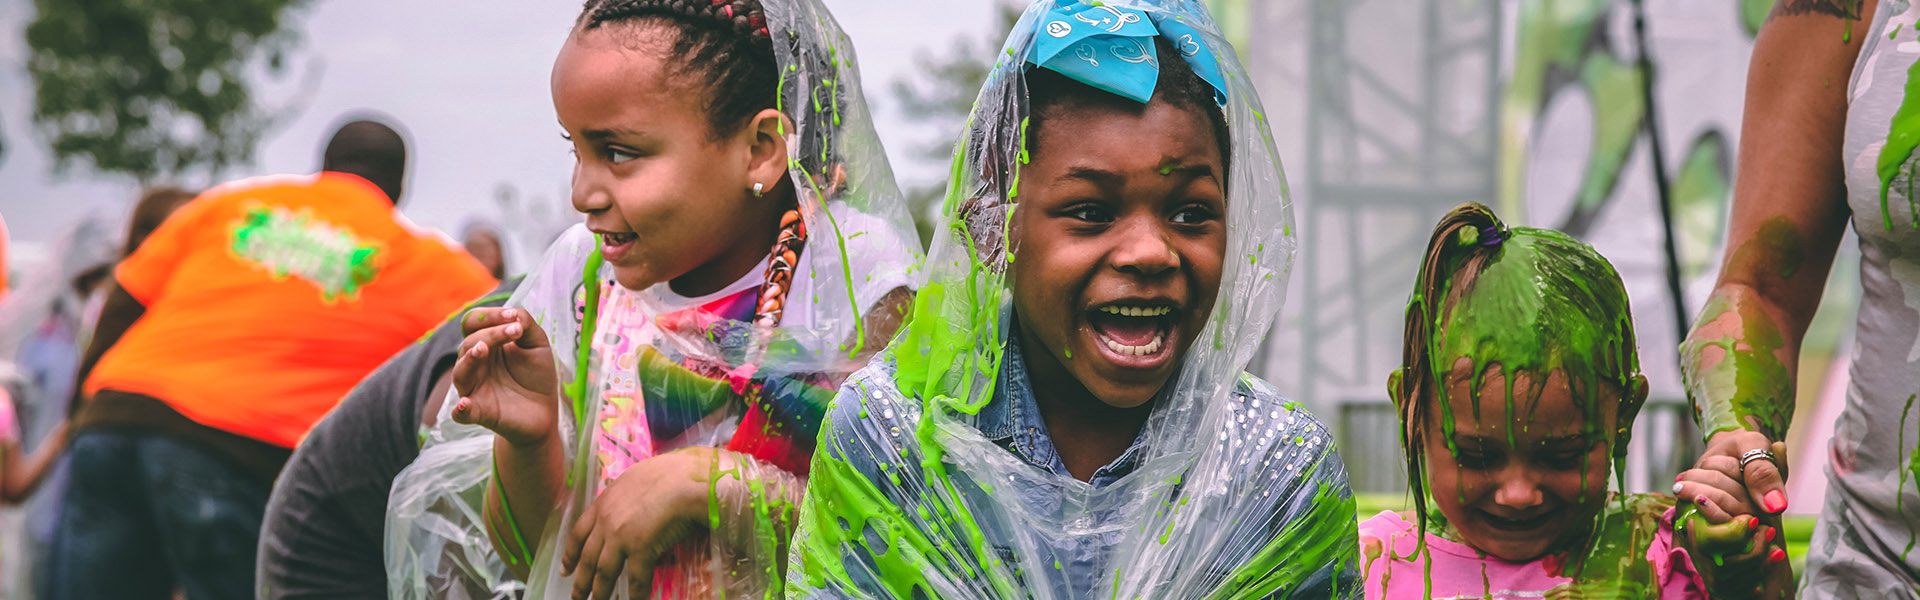 A group of children screaming in joy while covered with Nickelodeon green slime